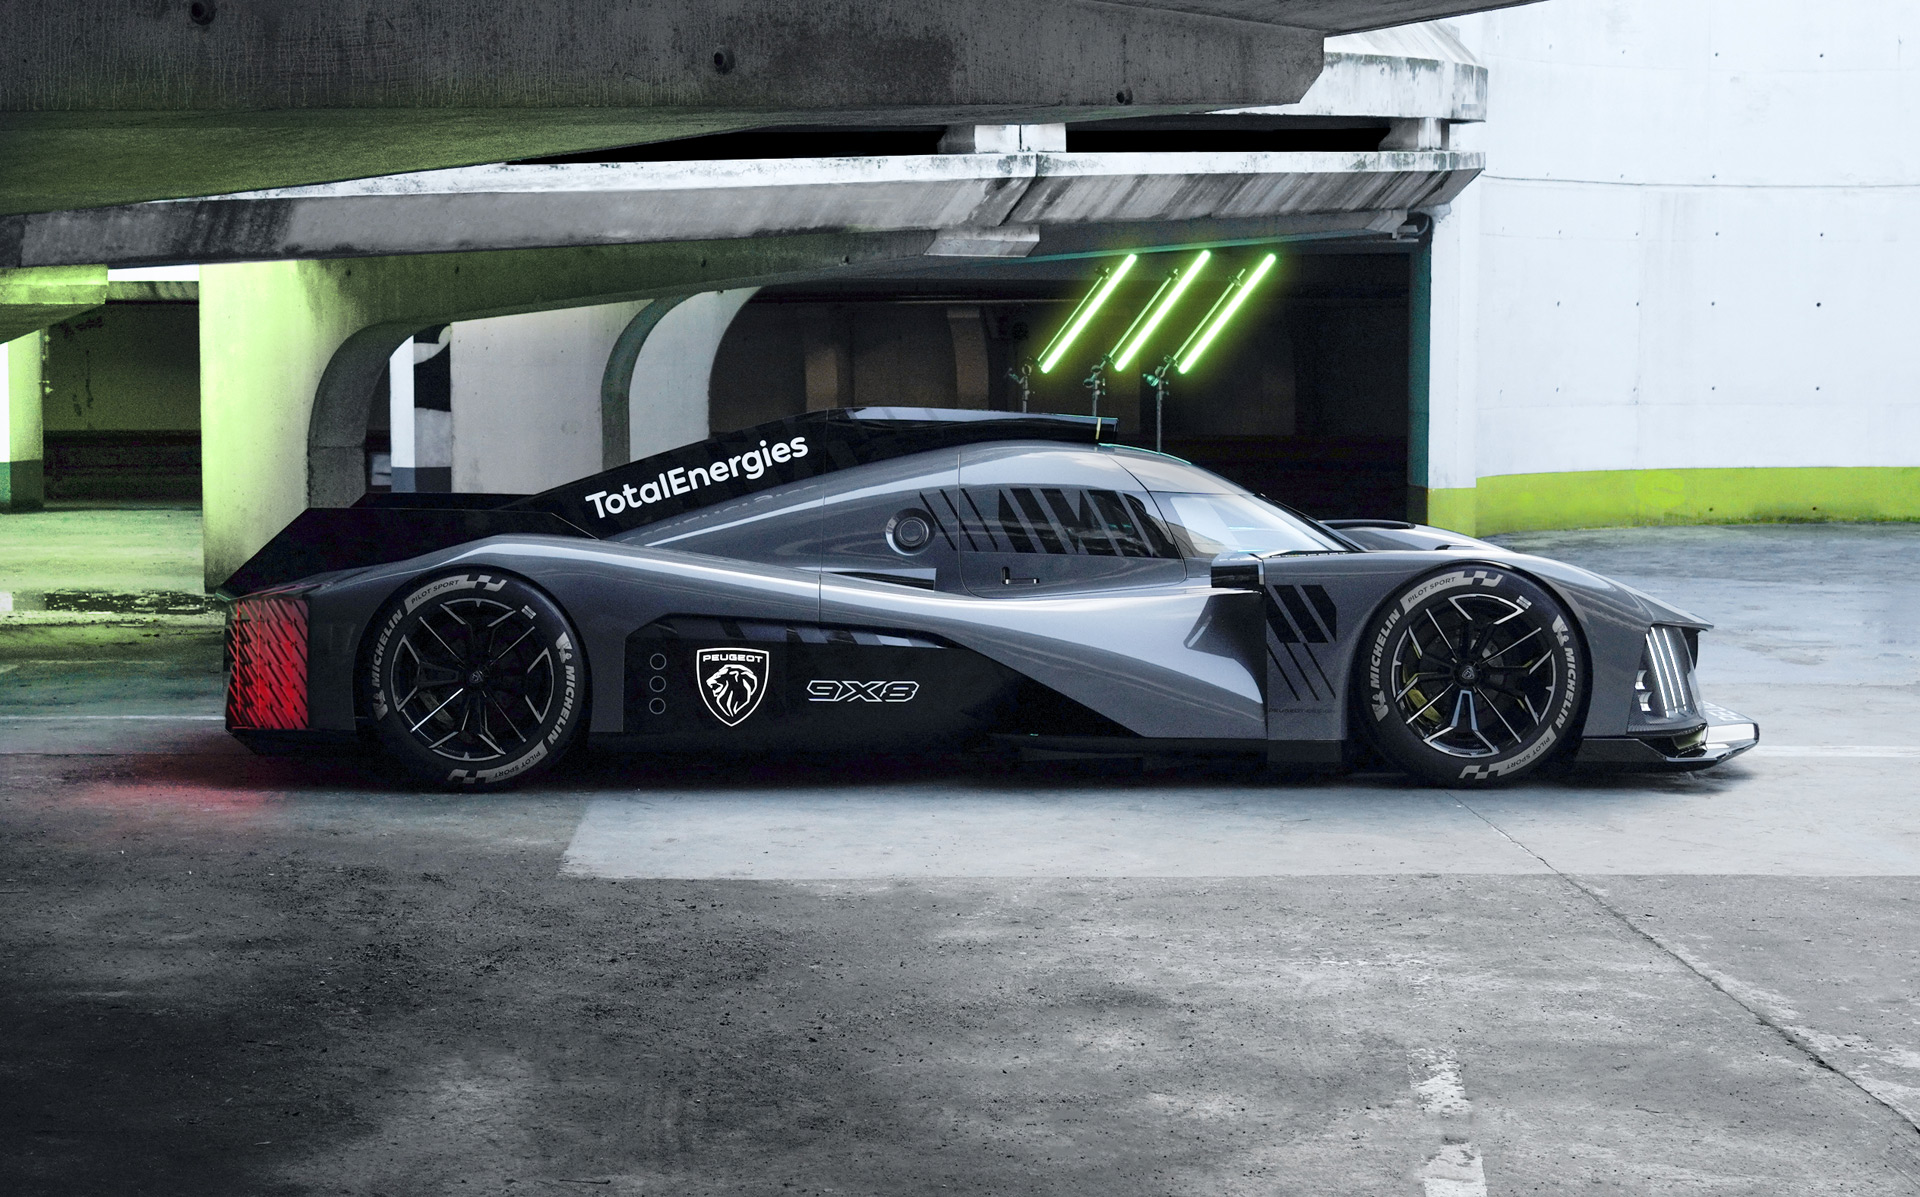 2022 Peugeot 9X8 Le Mans Hypercar takes to the track in new video